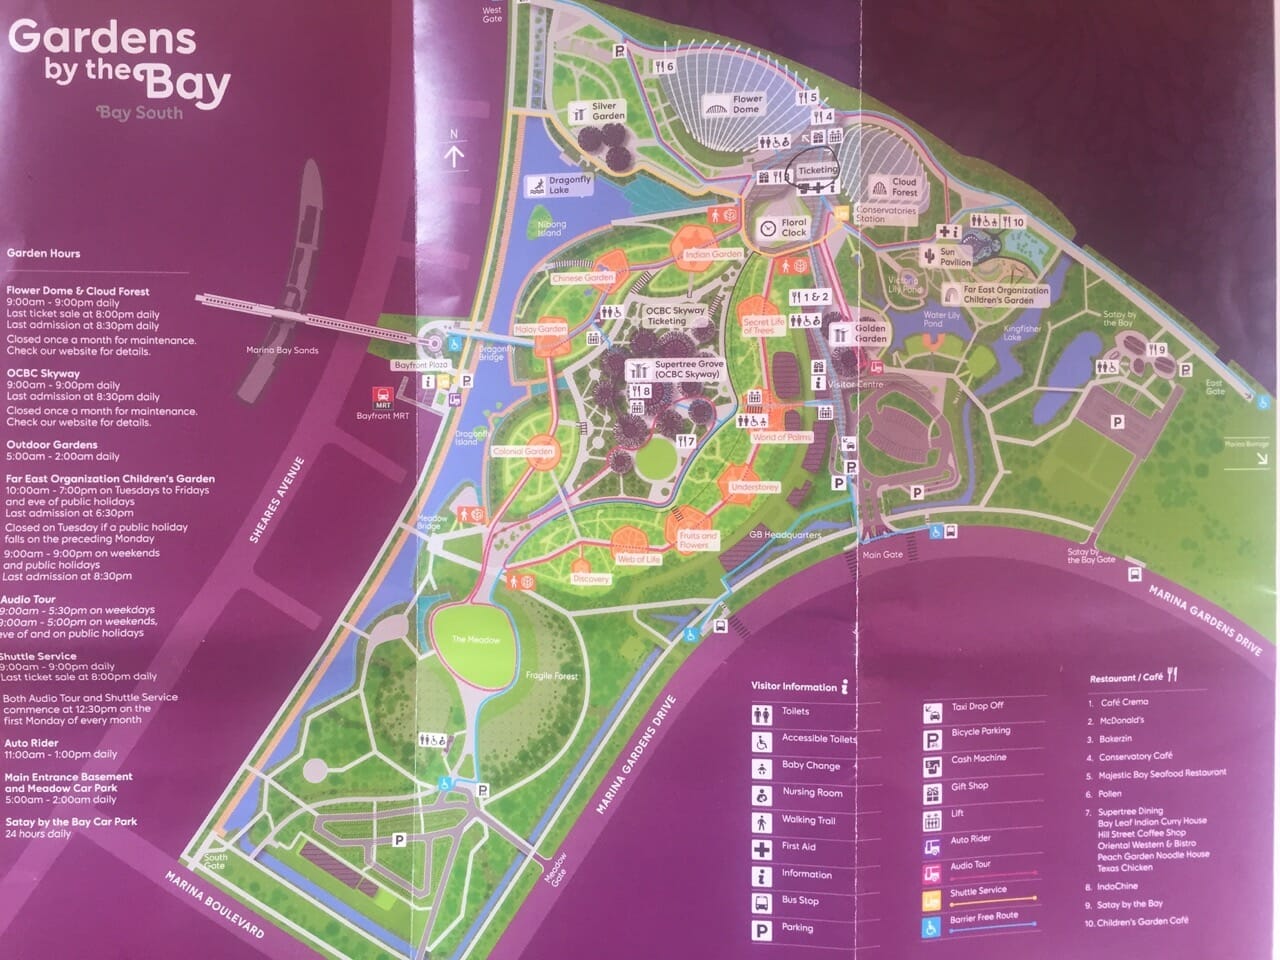 a printed map of the Gardens by the Bay